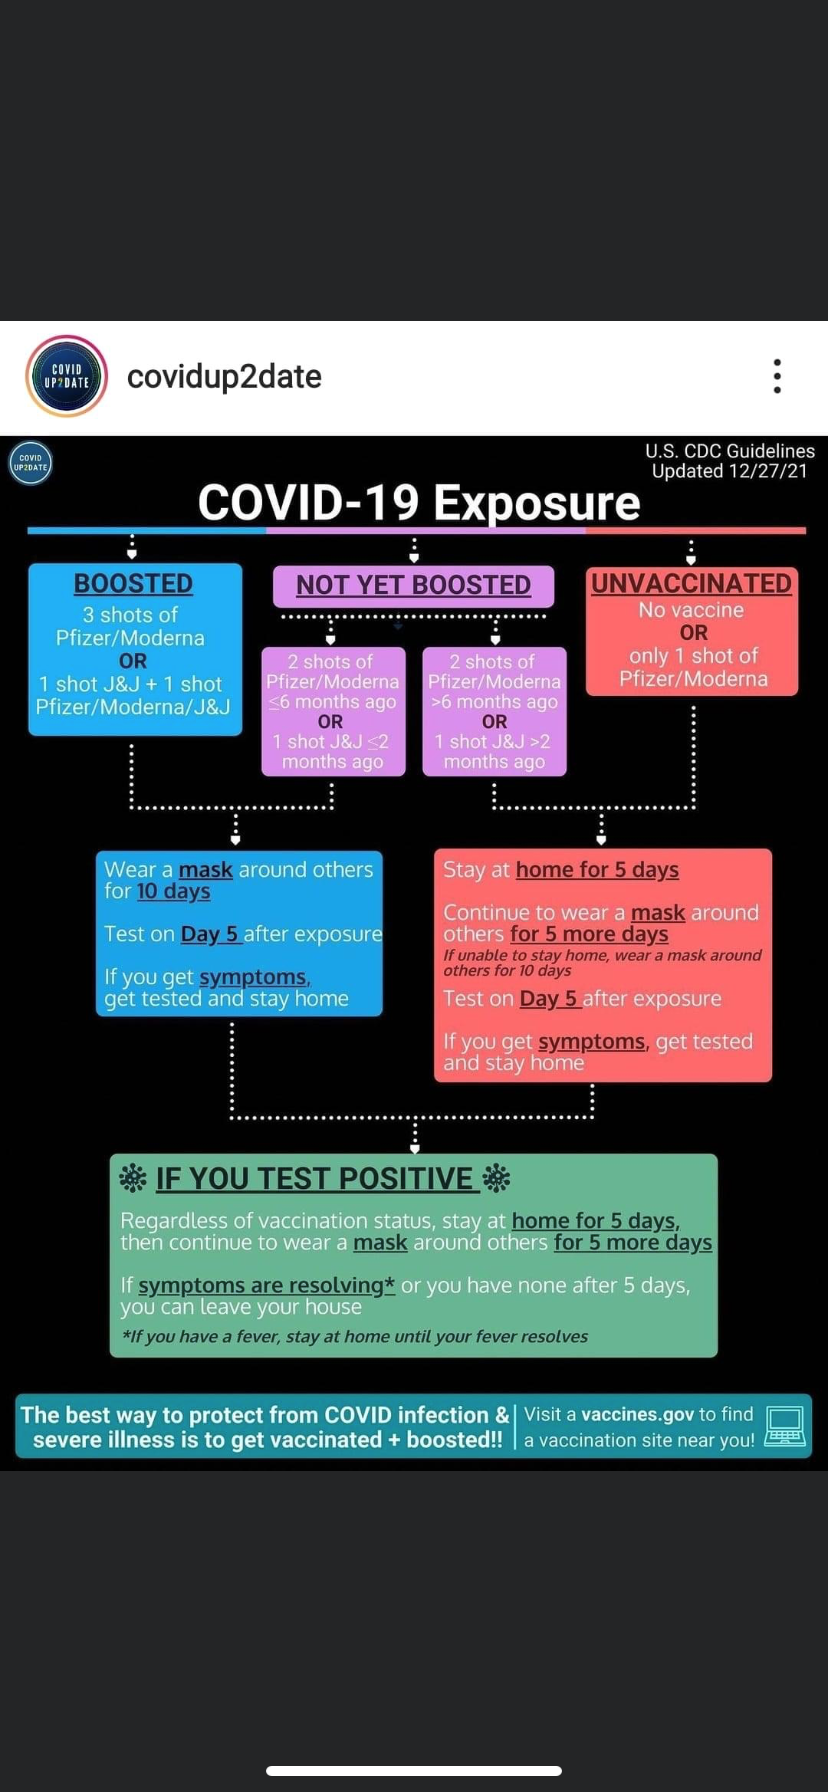 Quick Reference Guide for COVID-19 Exposure